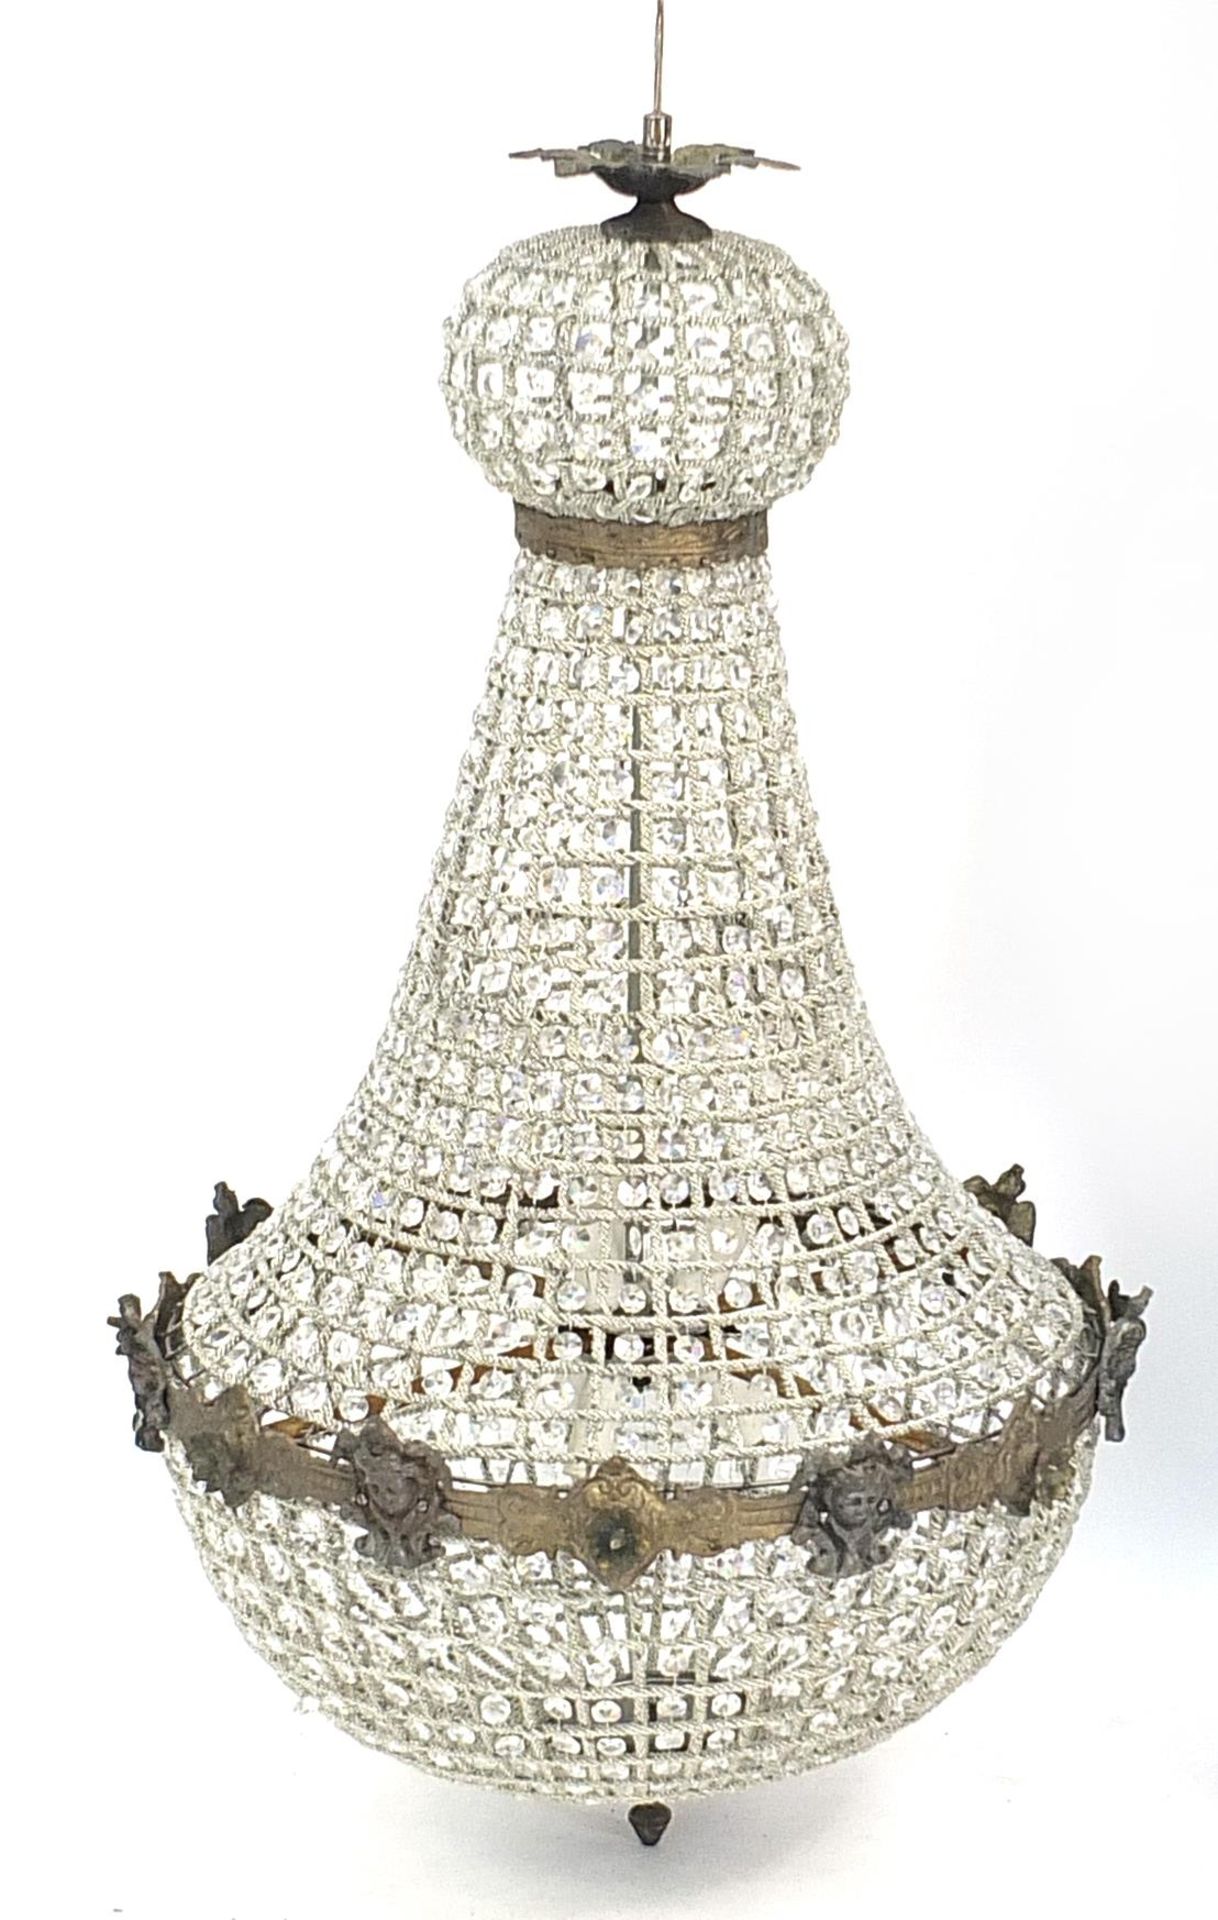 Large ornate chandelier with bronzed metal mounts, 90cm high - Image 2 of 2